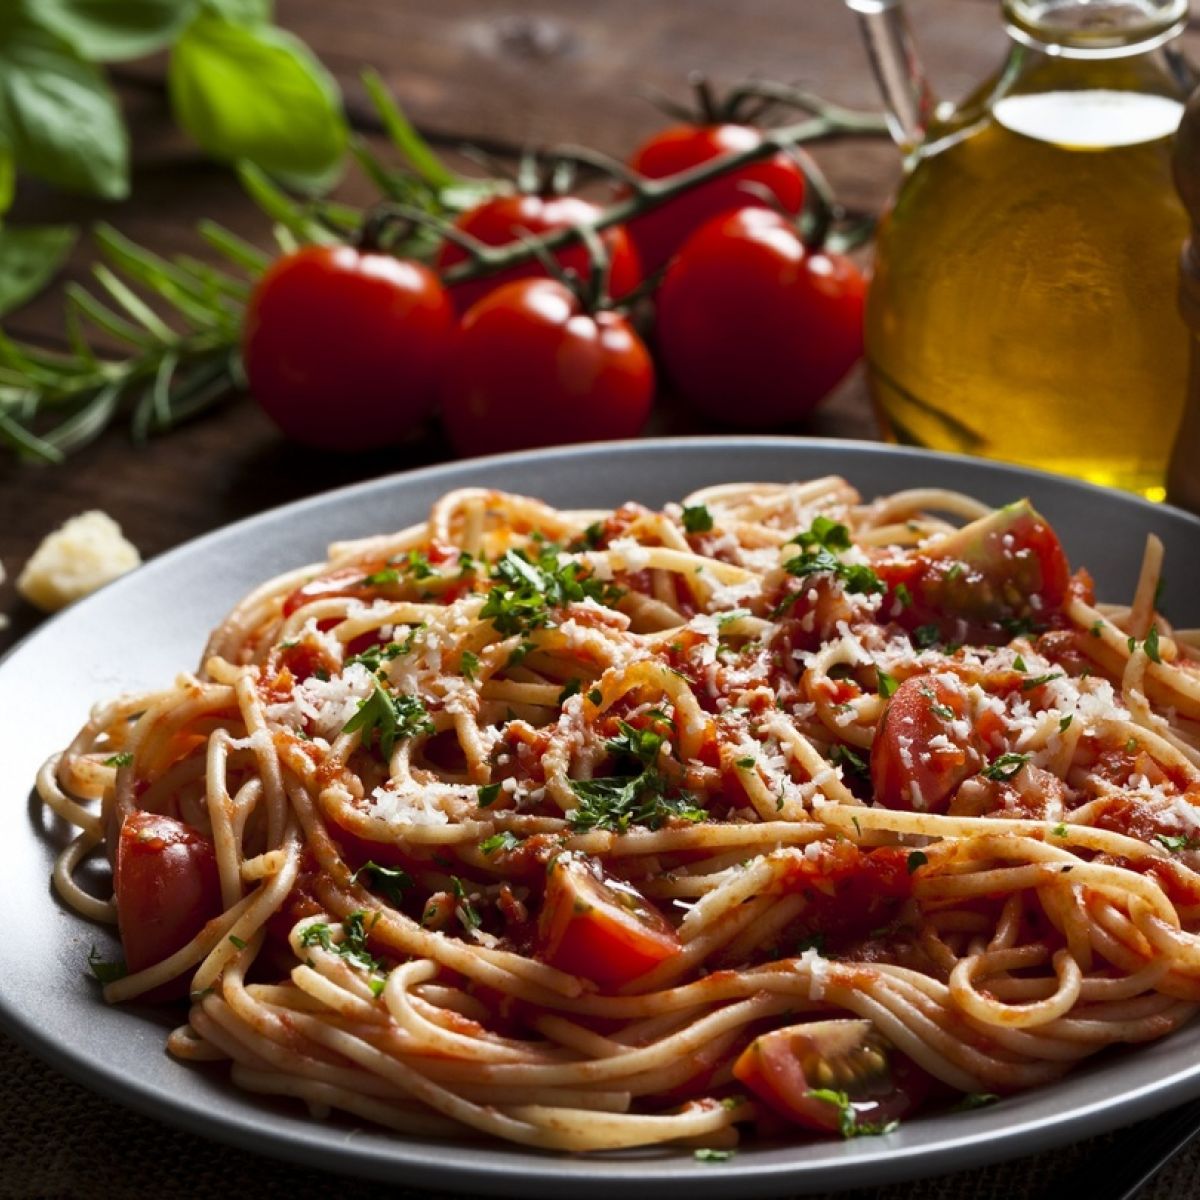 How Healthy Is Your Favourite Ready Made Pasta Sauce